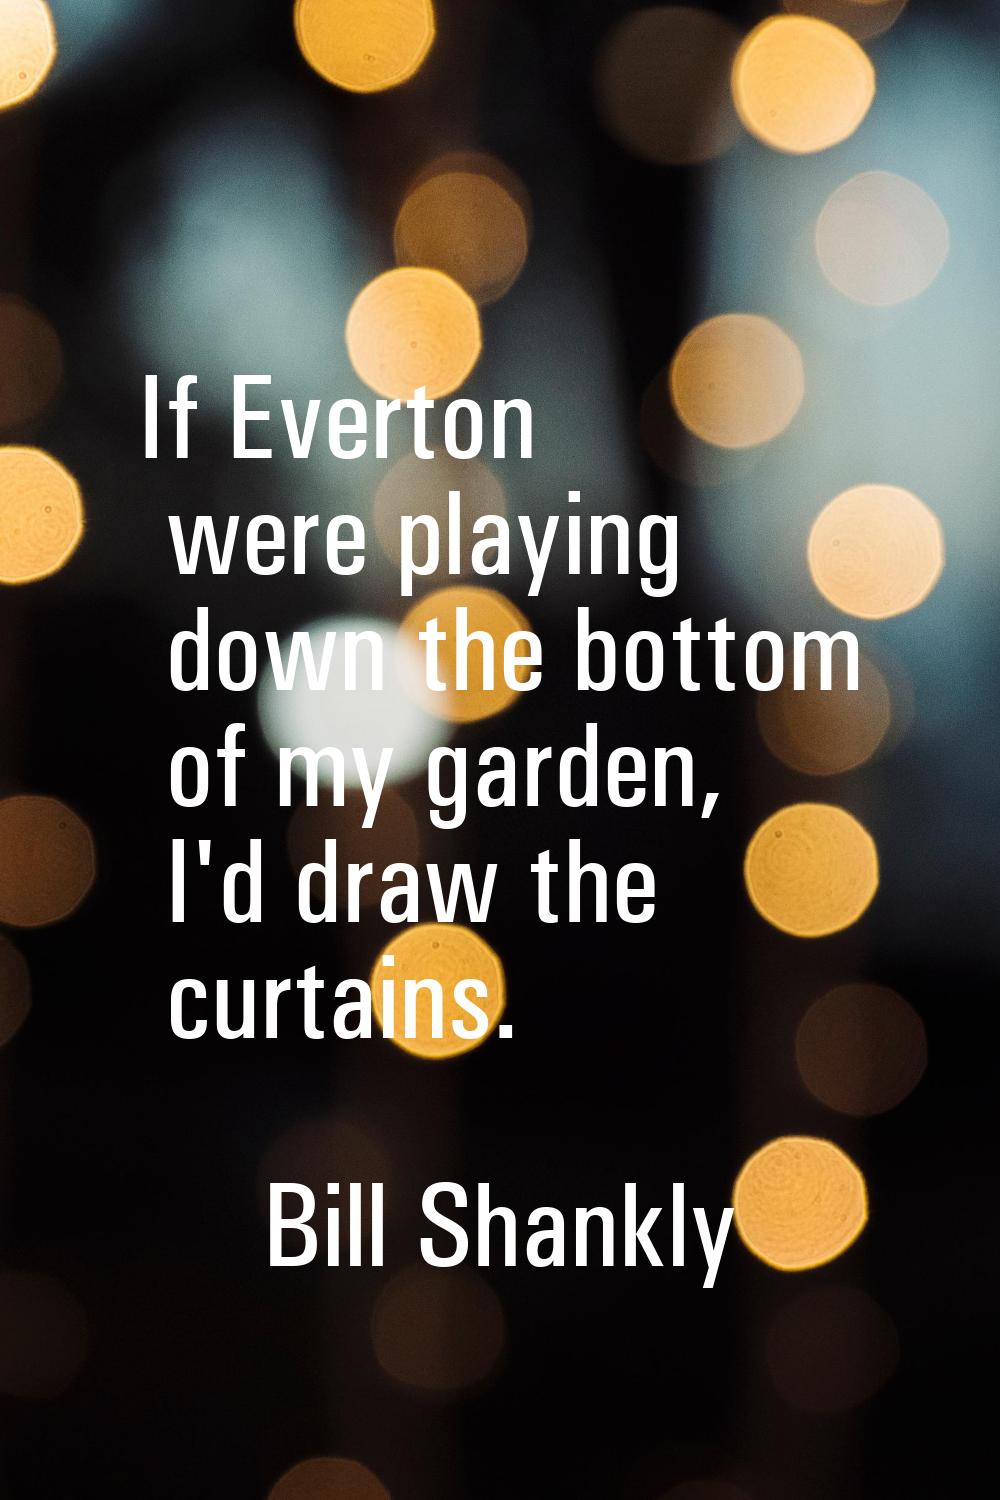 If Everton were playing down the bottom of my garden, I'd draw the curtains.